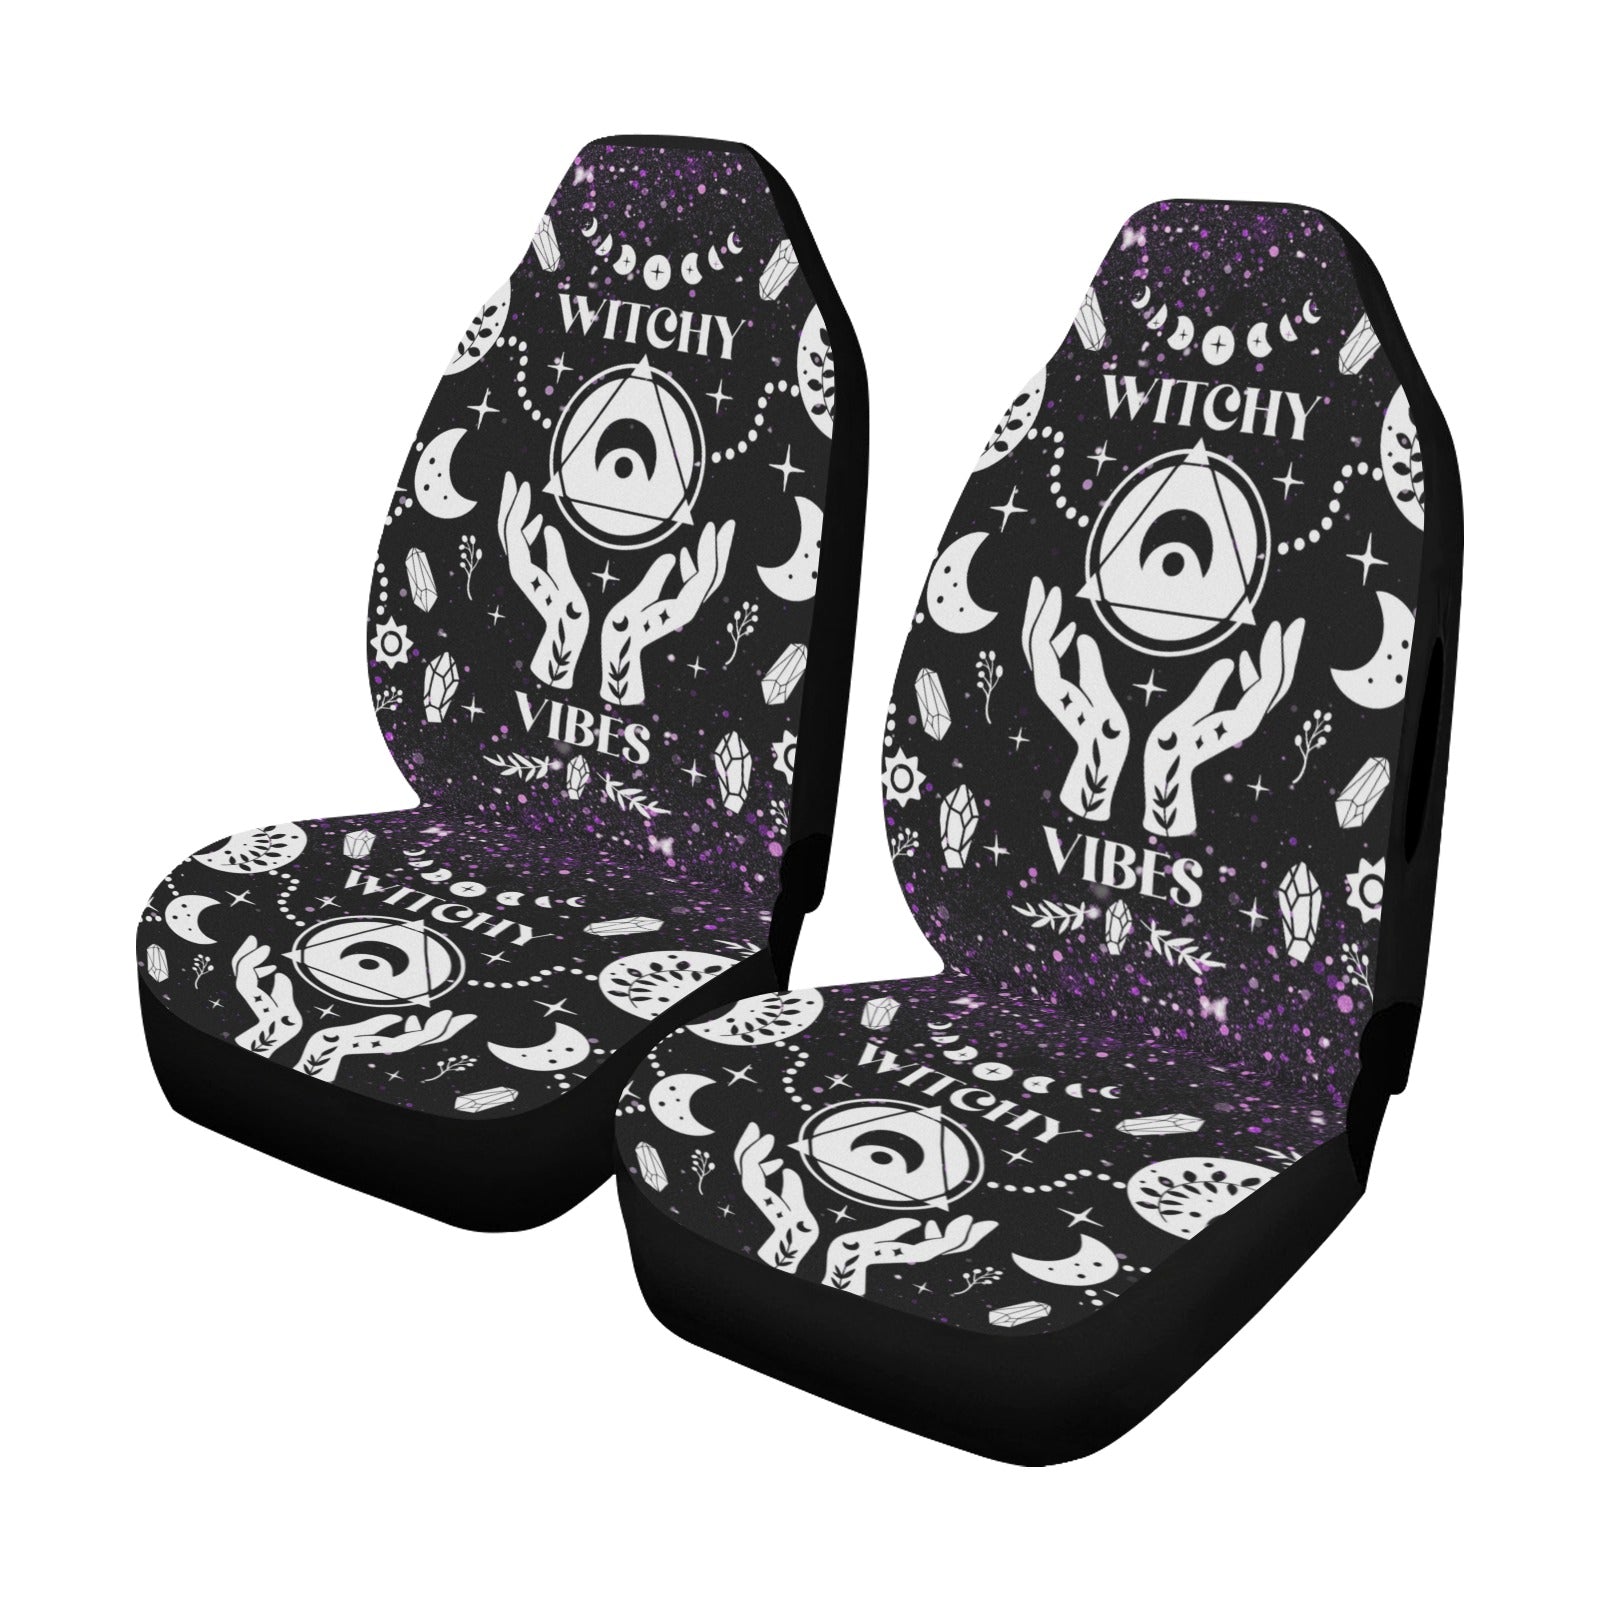 Witchy vibes Car Seat Covers-MoonChildWorld